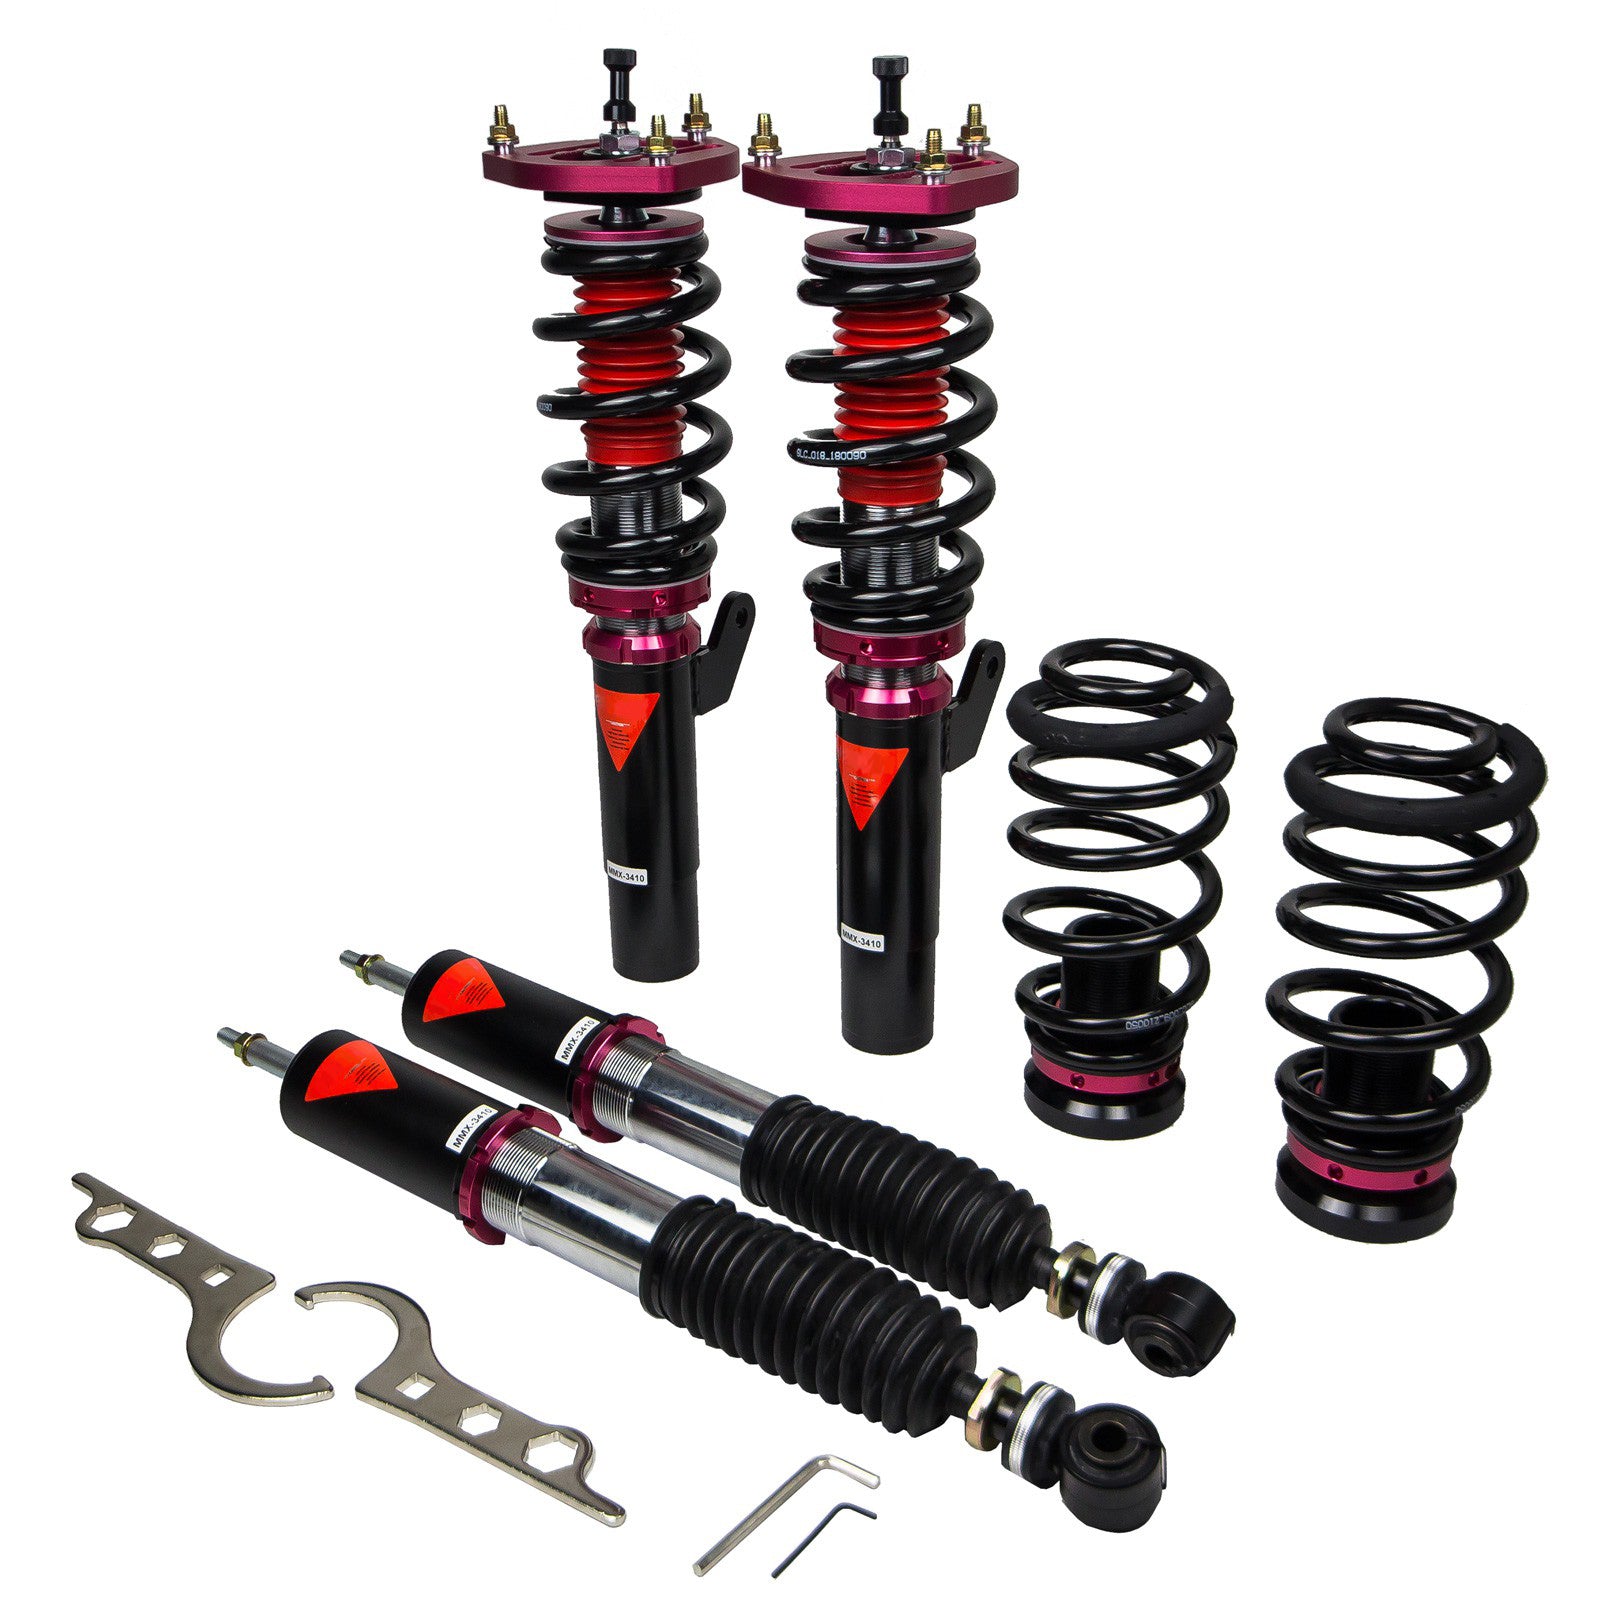 MMX3430-C MAXX Coilovers Lowering Kit, Fully Adjustable, Ride Height, 40 Clicks Rebound Settings, Volkswagen Golf R(MK7) 2015+